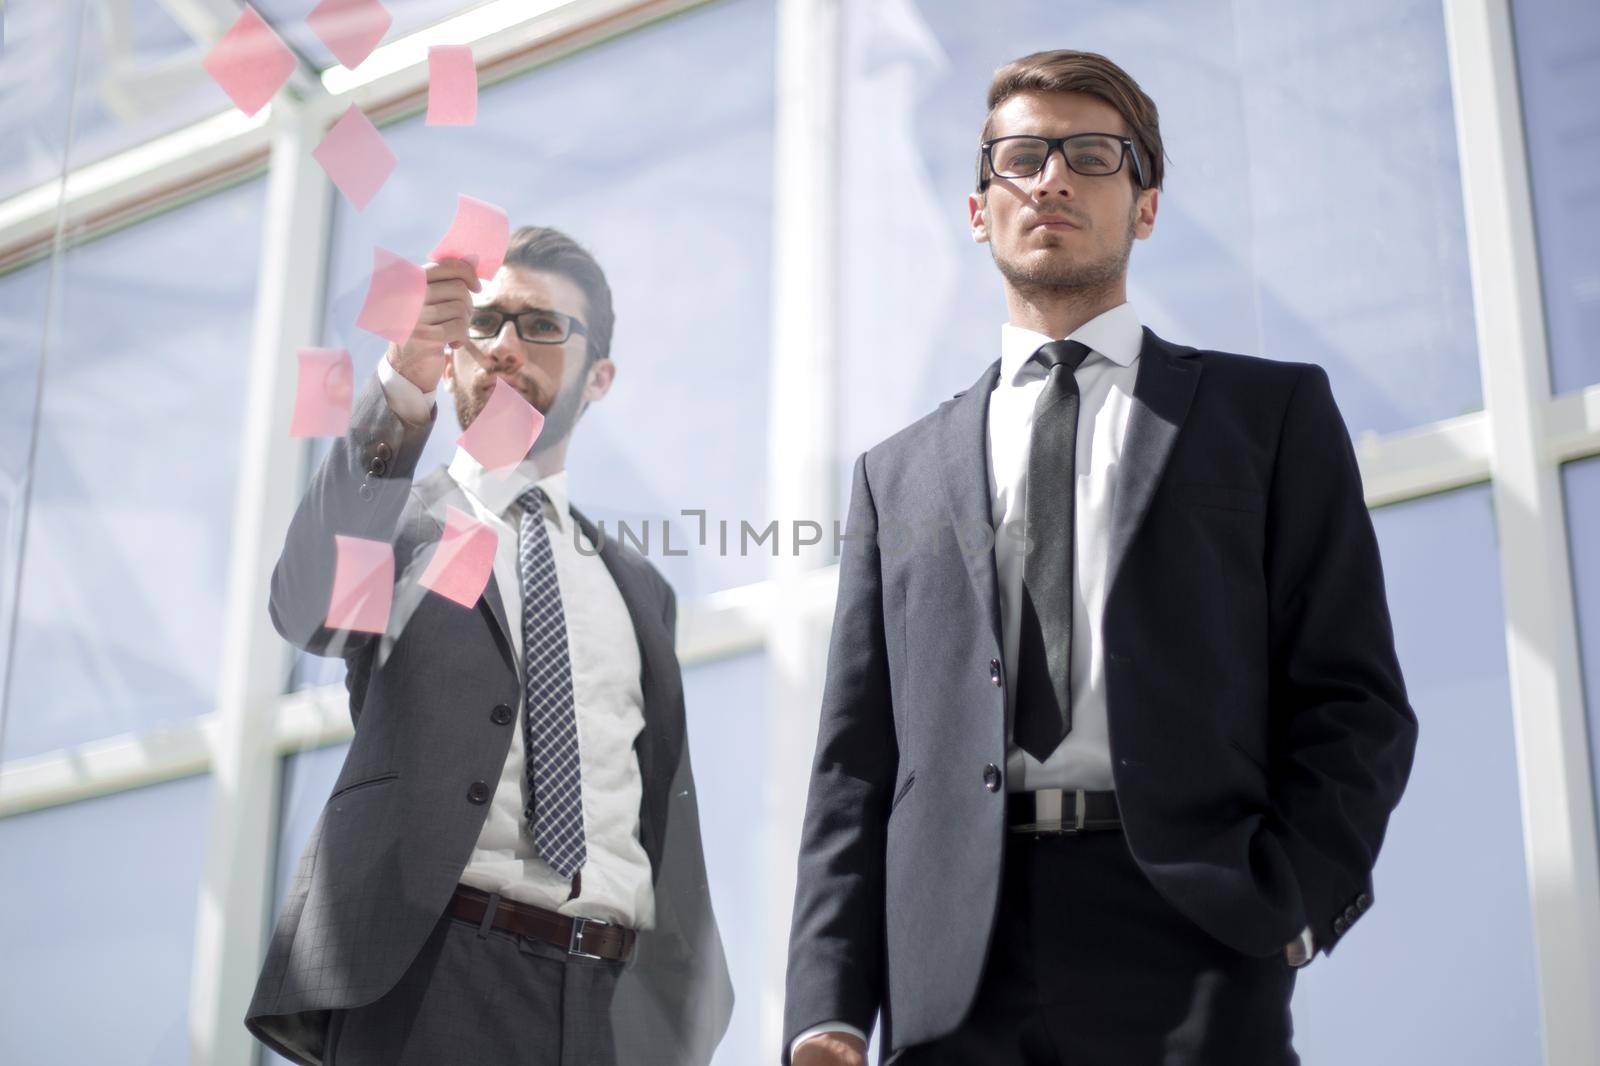 Business colleagues read stickers pasted on a transparent glass wall. business concept